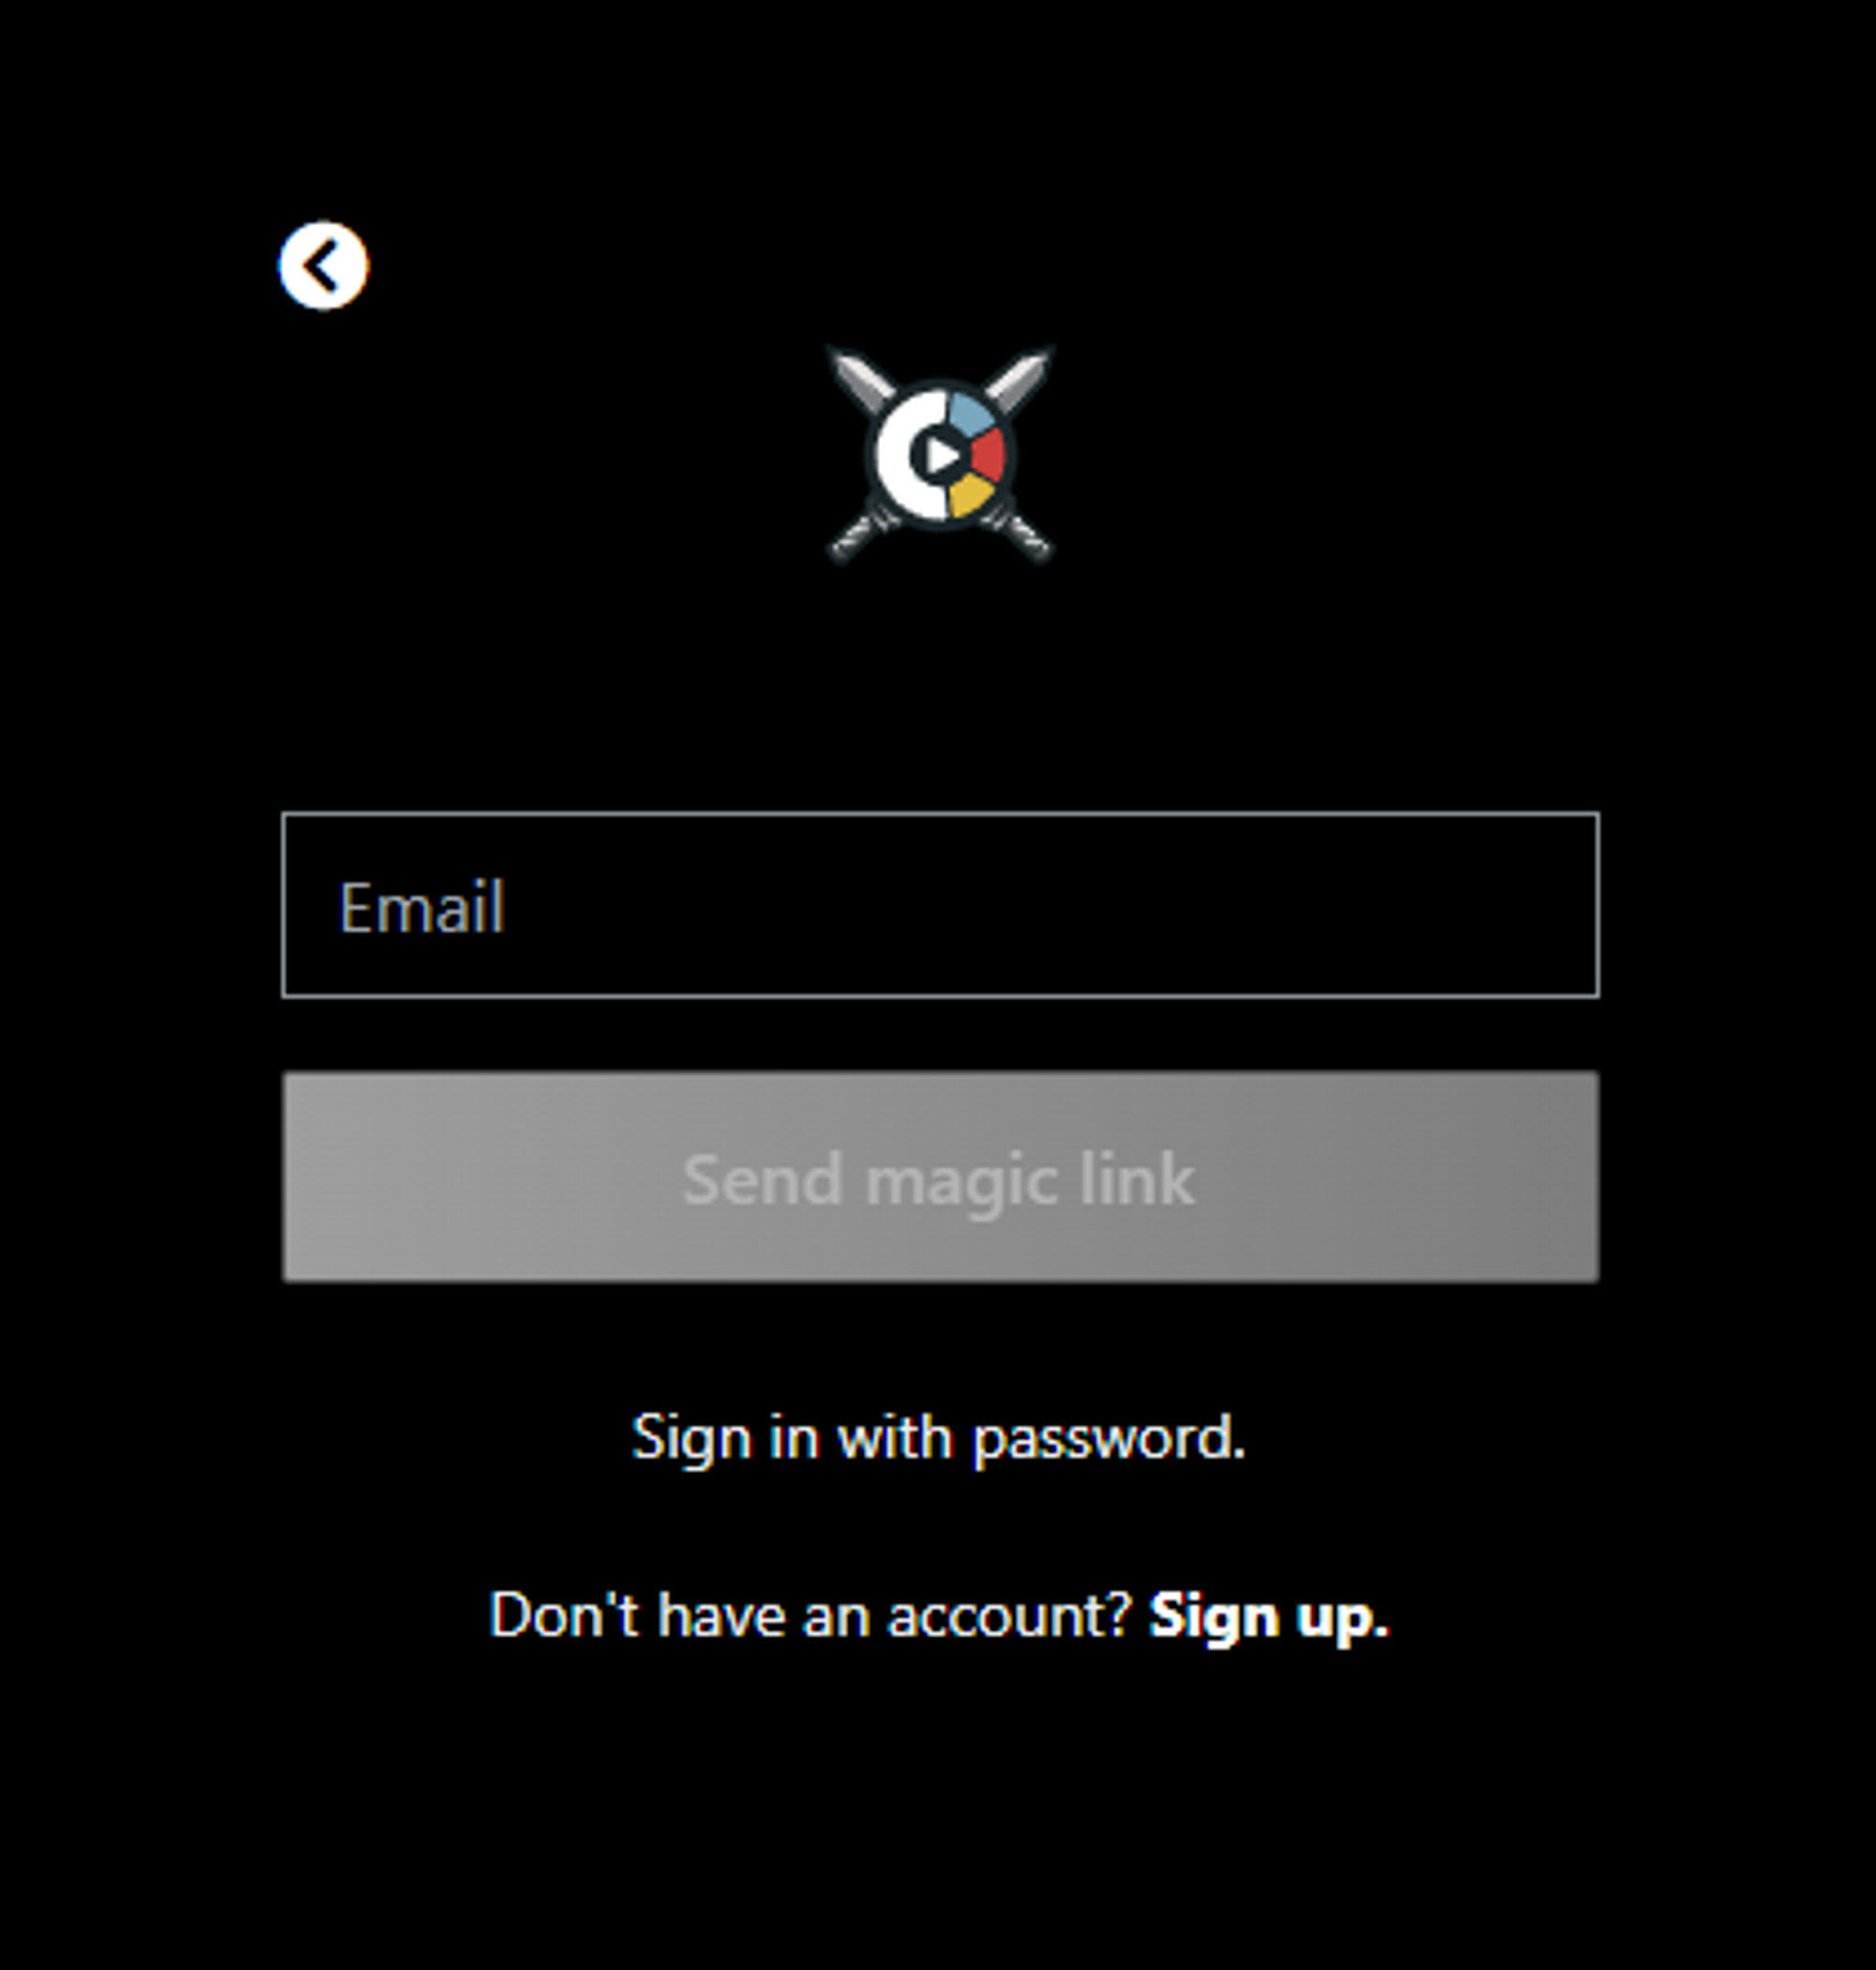 Type your email to immediately sign up with a magic link.